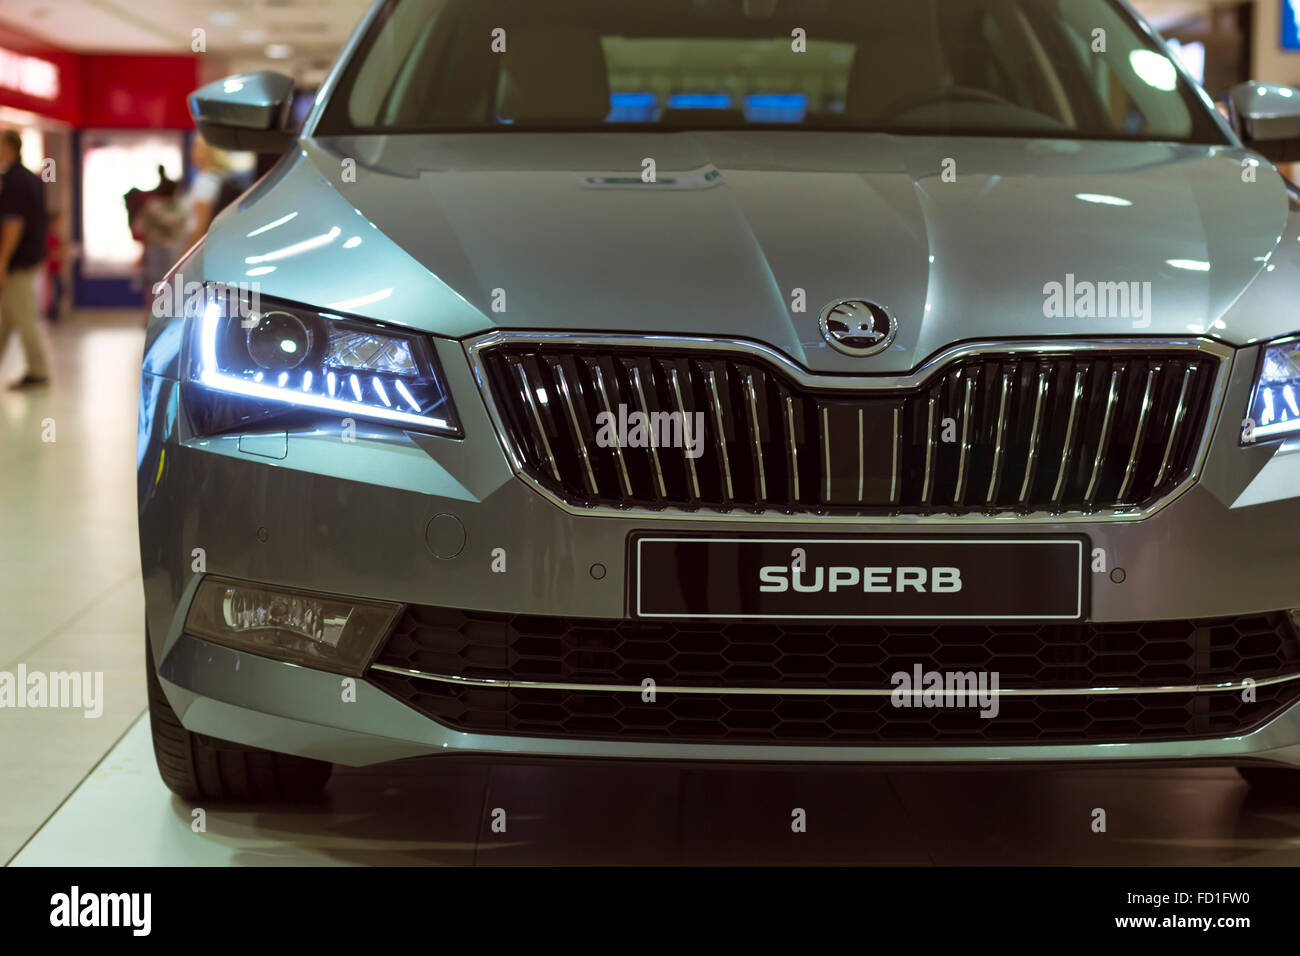 PRAGUE, CZECH REPUBLIC - AUGUST 28, 2015: Detail of brand new Skoda Superb in silver color in the lounge at Prague airport Stock Photo